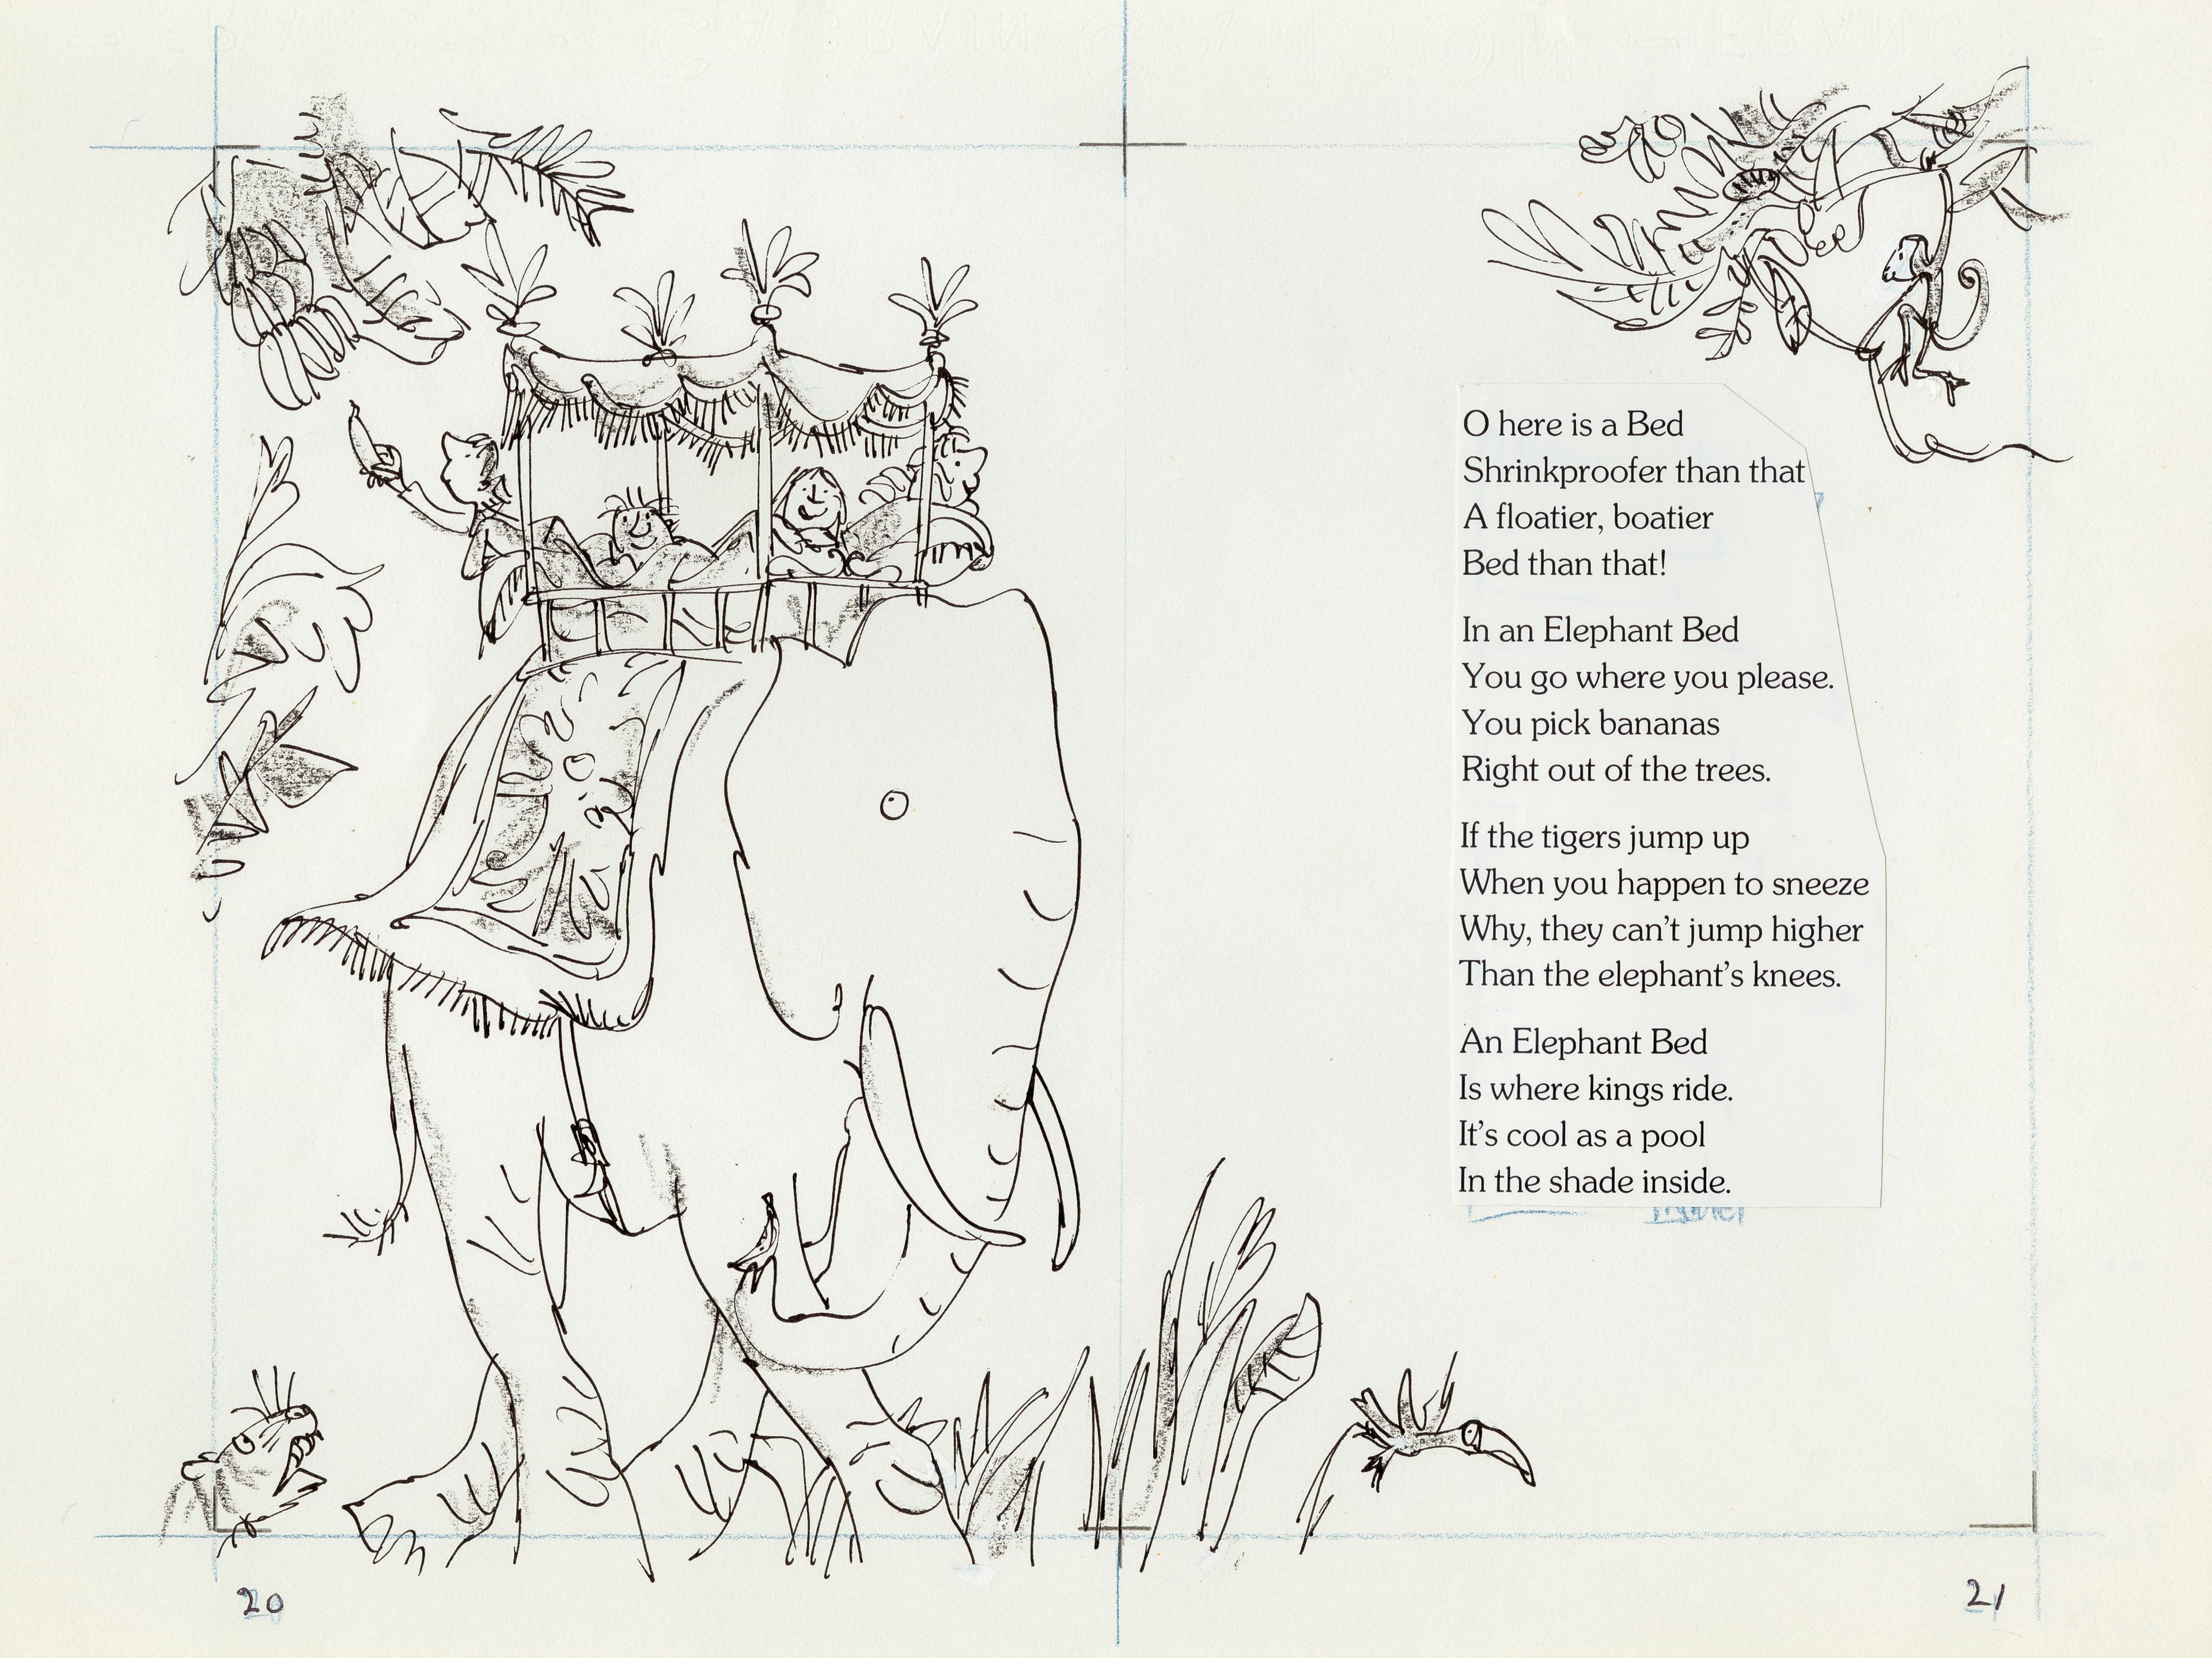 Line drawing of four children riding an elephant, watched by a tiger and monkey